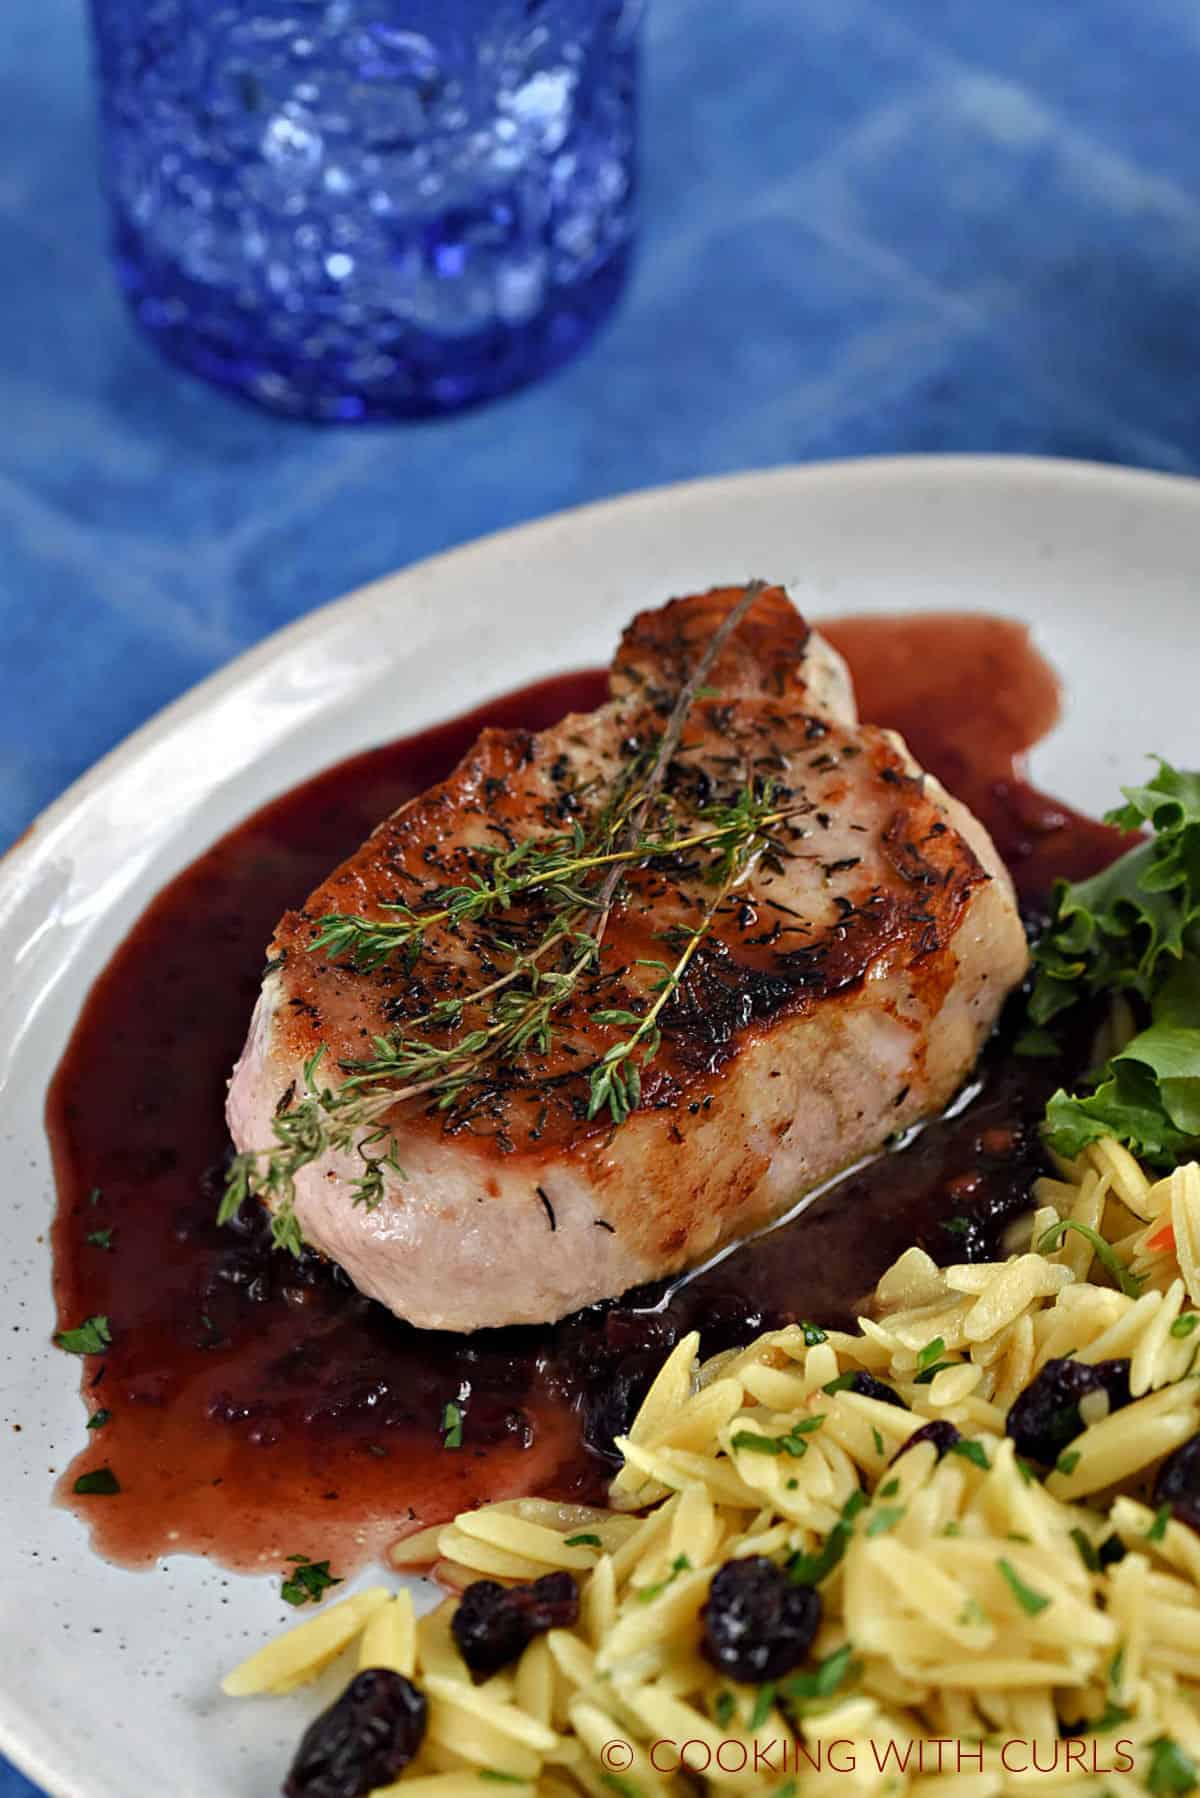 A pork chop sitting on cherry sauce topped with thyme sprigs next to orzo pasta mixed with dried cherries.